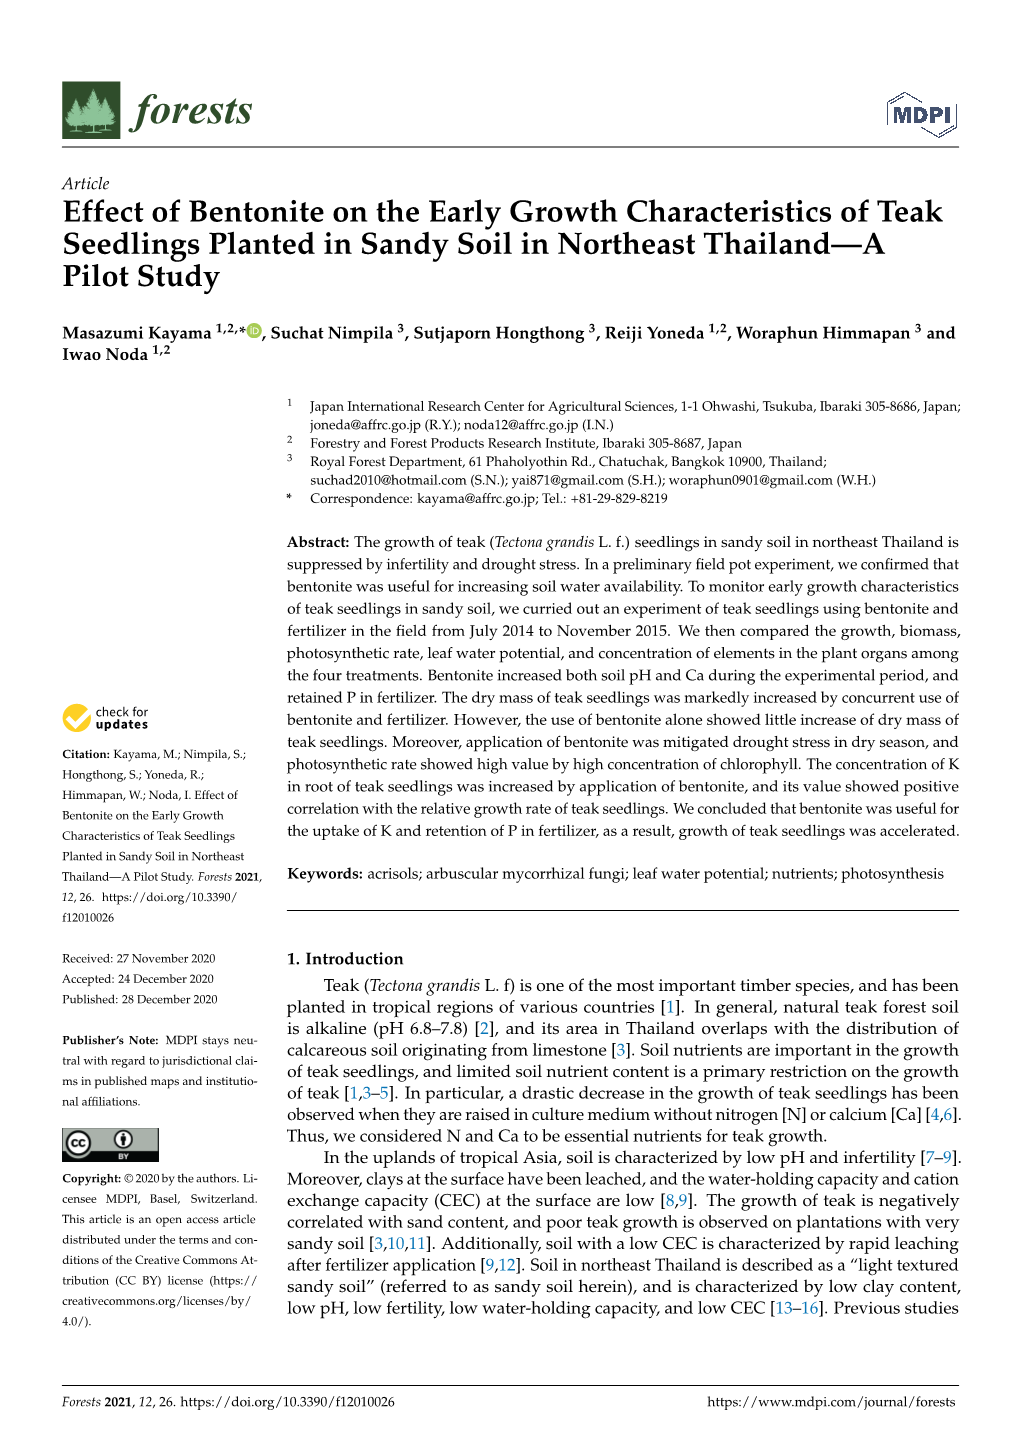 Effect of Bentonite on the Early Growth Characteristics of Teak Seedlings Planted in Sandy Soil in Northeast Thailand—A Pilot Study